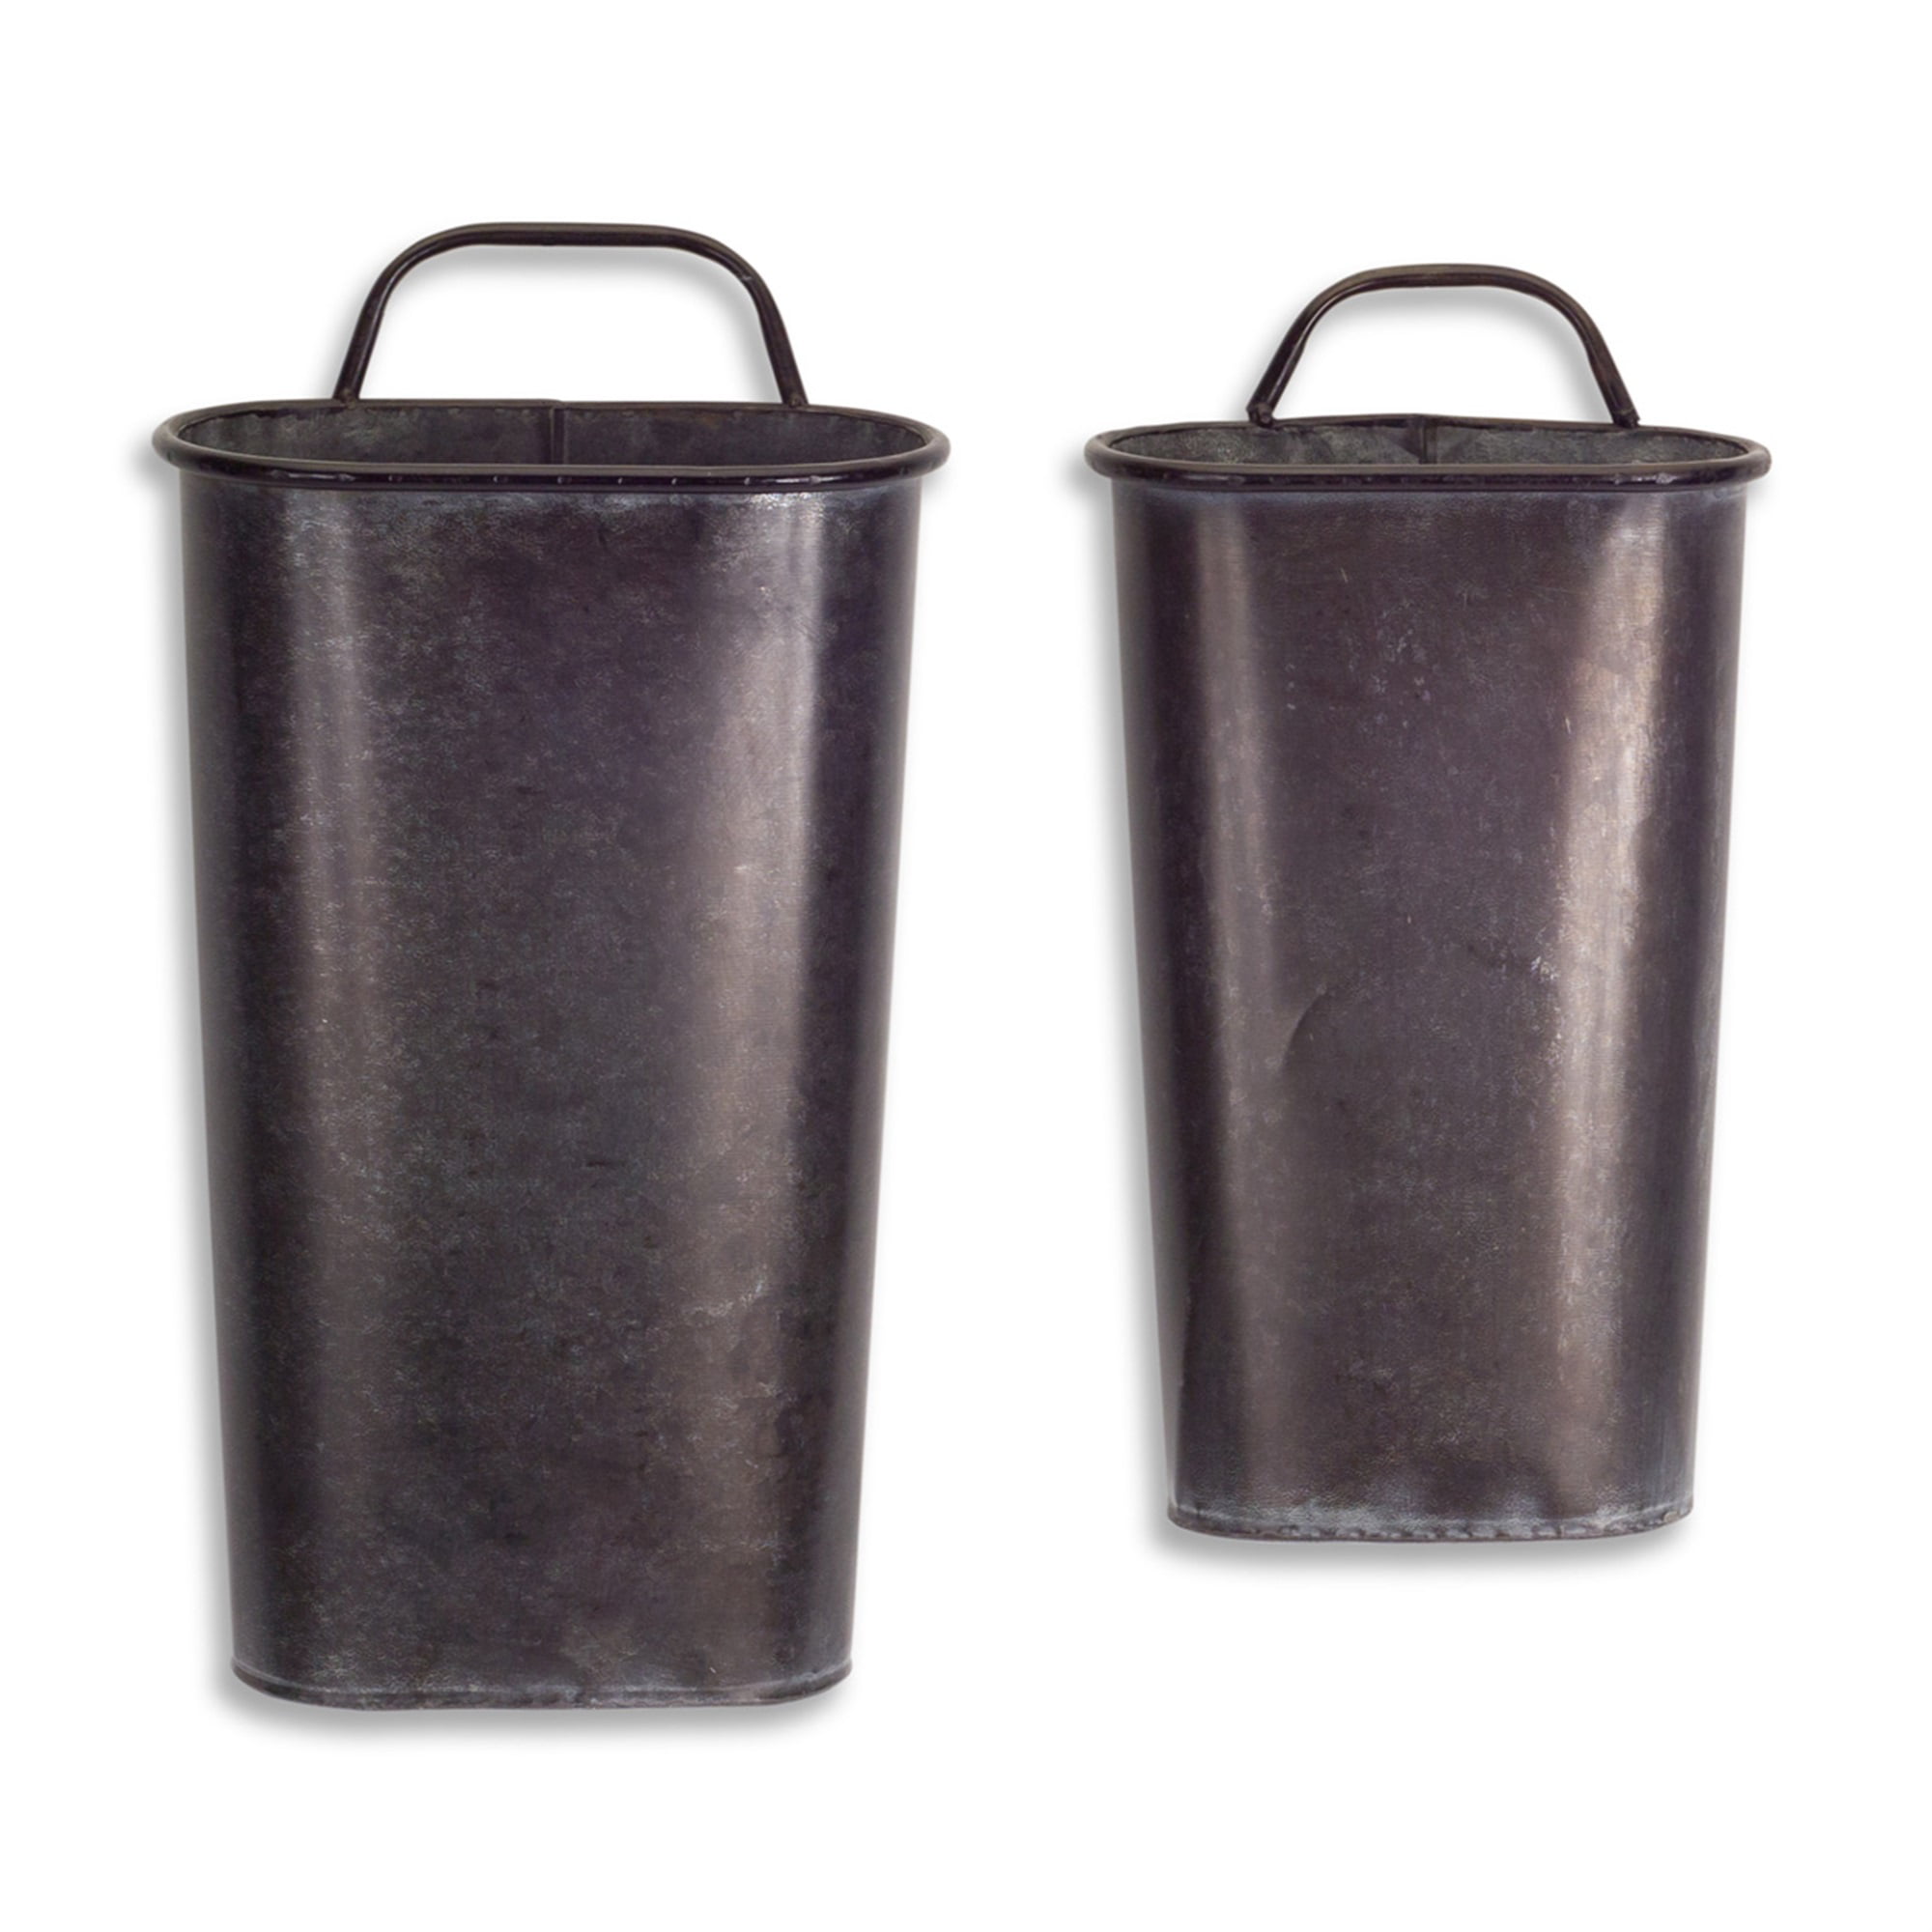 Wall Container (Set of 2) 8"Lx4"Wx15"H, 9.5"Lx5"Wx17.5"H Metal